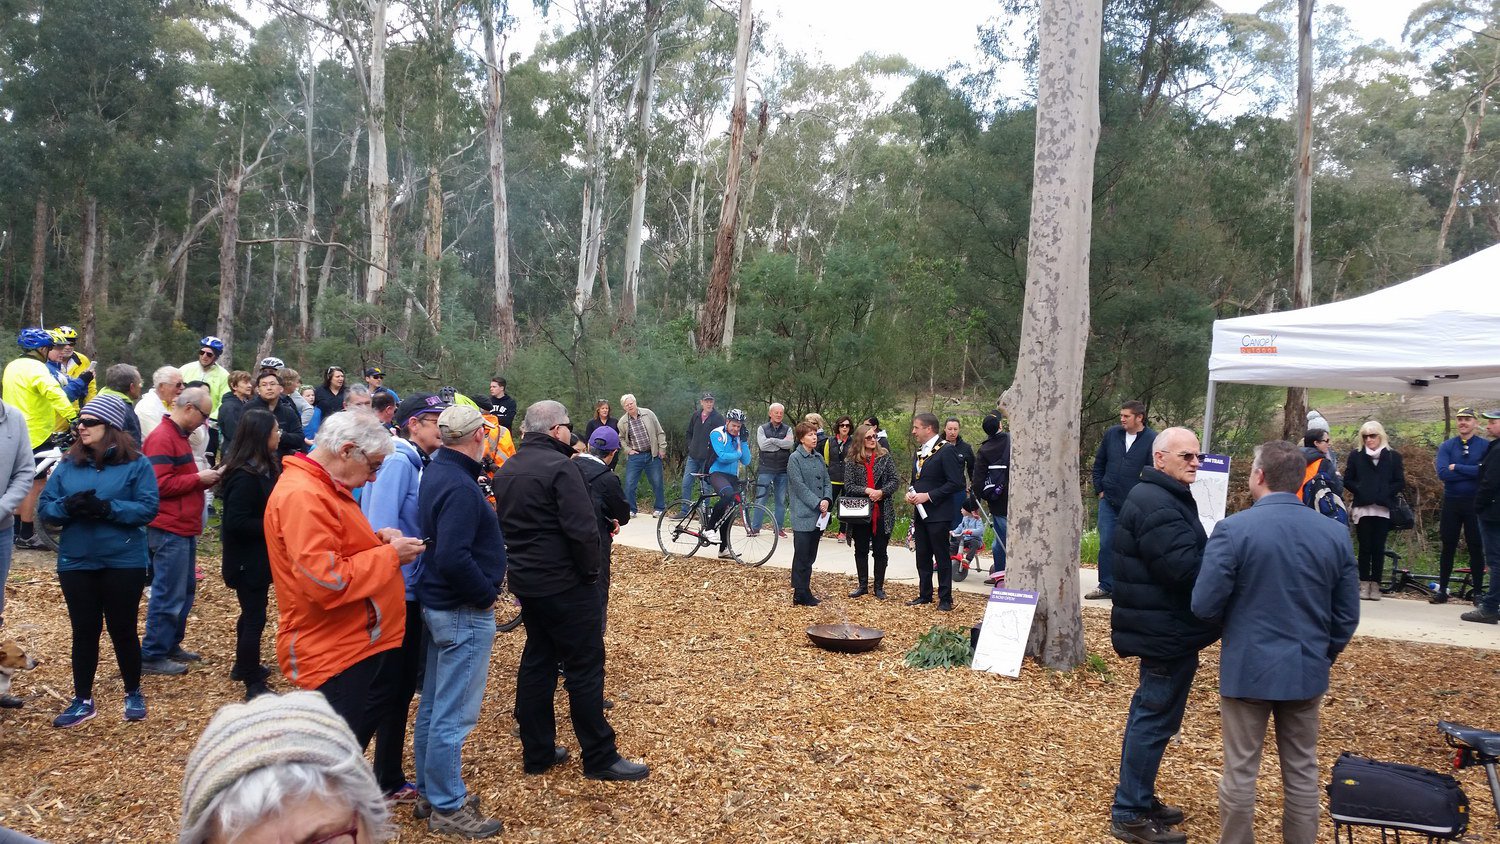 Gathering crowd for the ceremony. Mullum Mullum trail official opening, 16th September 2018.